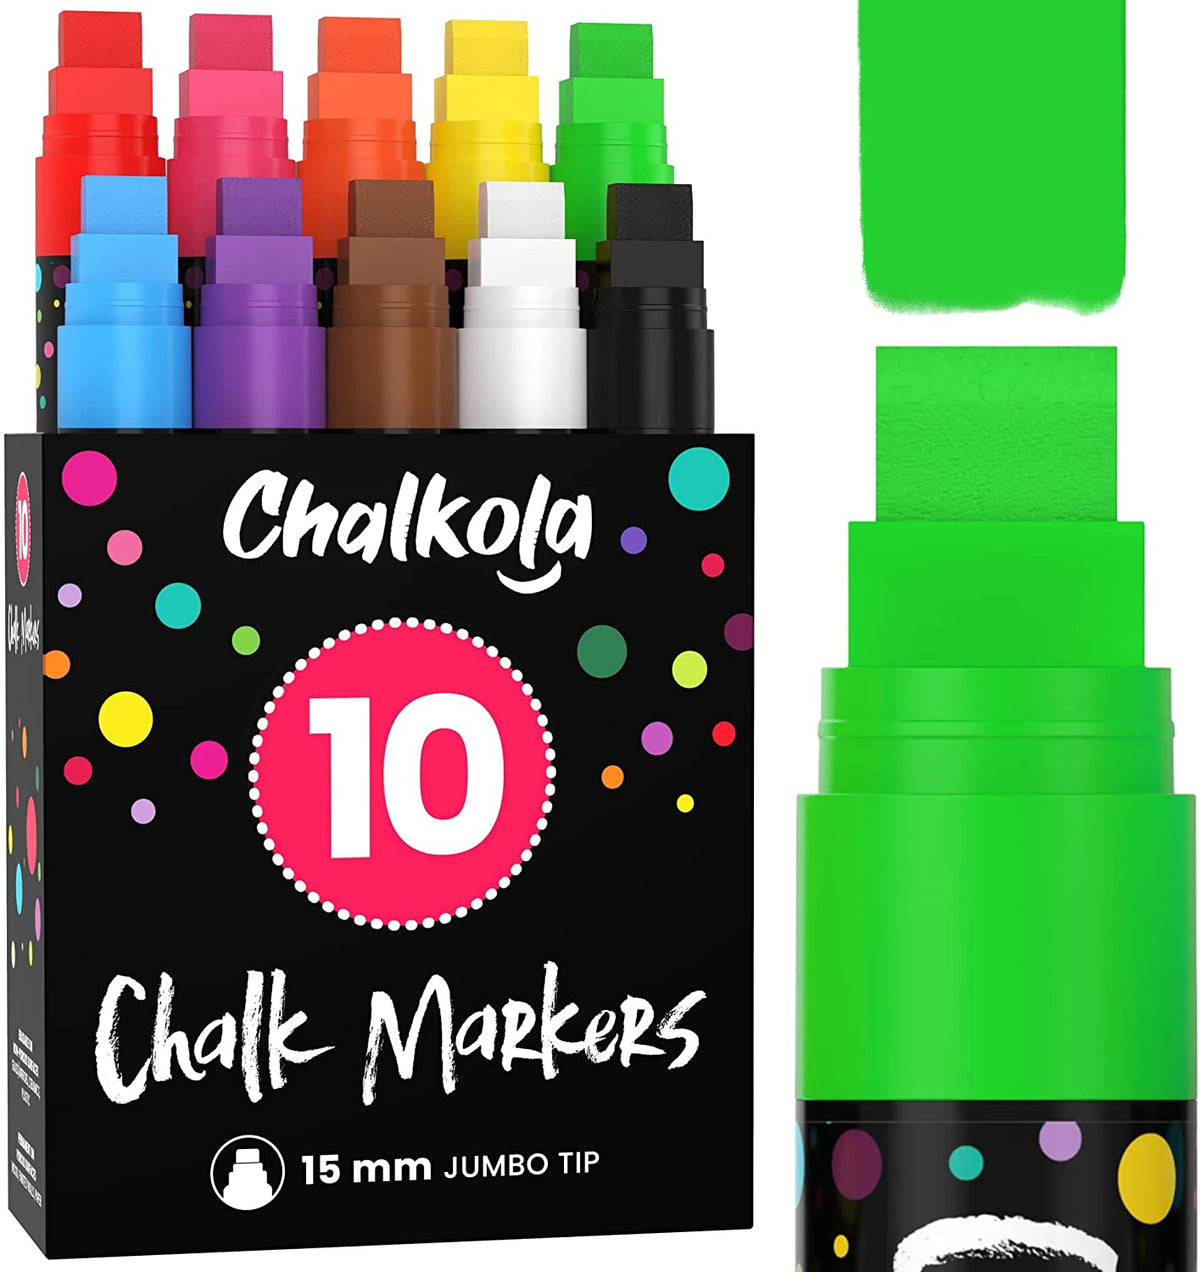  18 Classic Neon Chalk Markers Double Pack of Both Fine and  Reversible Medium Tip Liquid Chalk Pens Wet Erasable - Menu Boards, Glass,  Windows, White/Chalk Boards, Classrooms, Mirrors, Plastic 